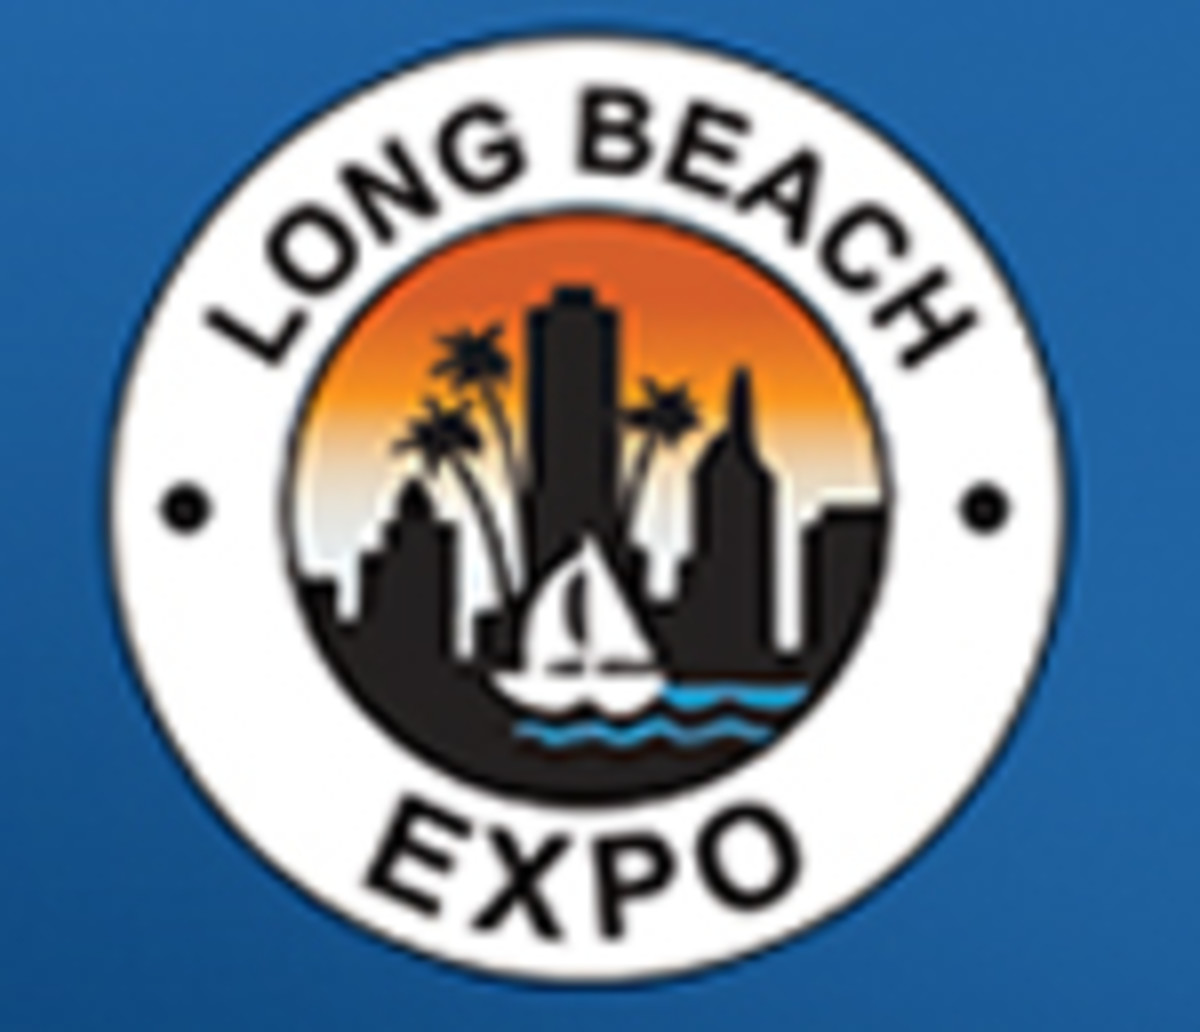 The Long Beach Expo had an active wholesale coin market where dollars and gold were in demand.